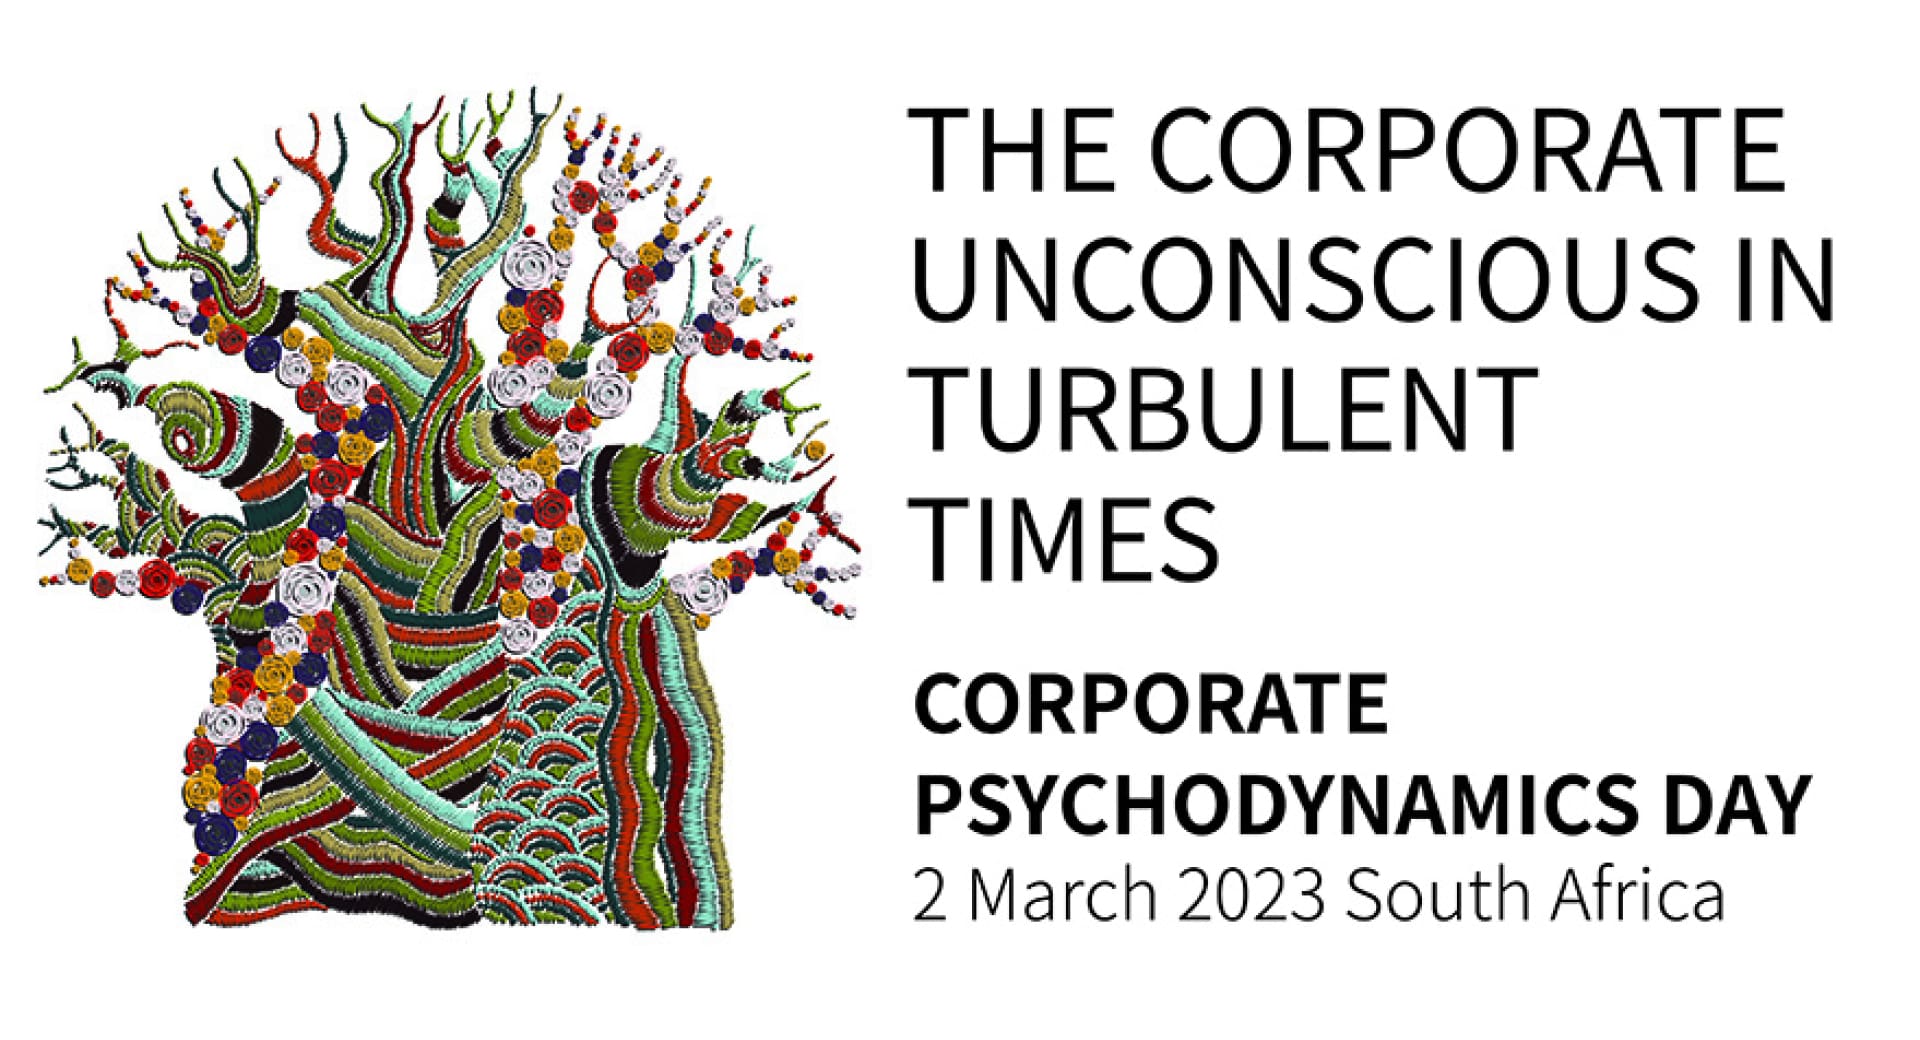 The corporate unconscious in turbulent times: 2 March 2023